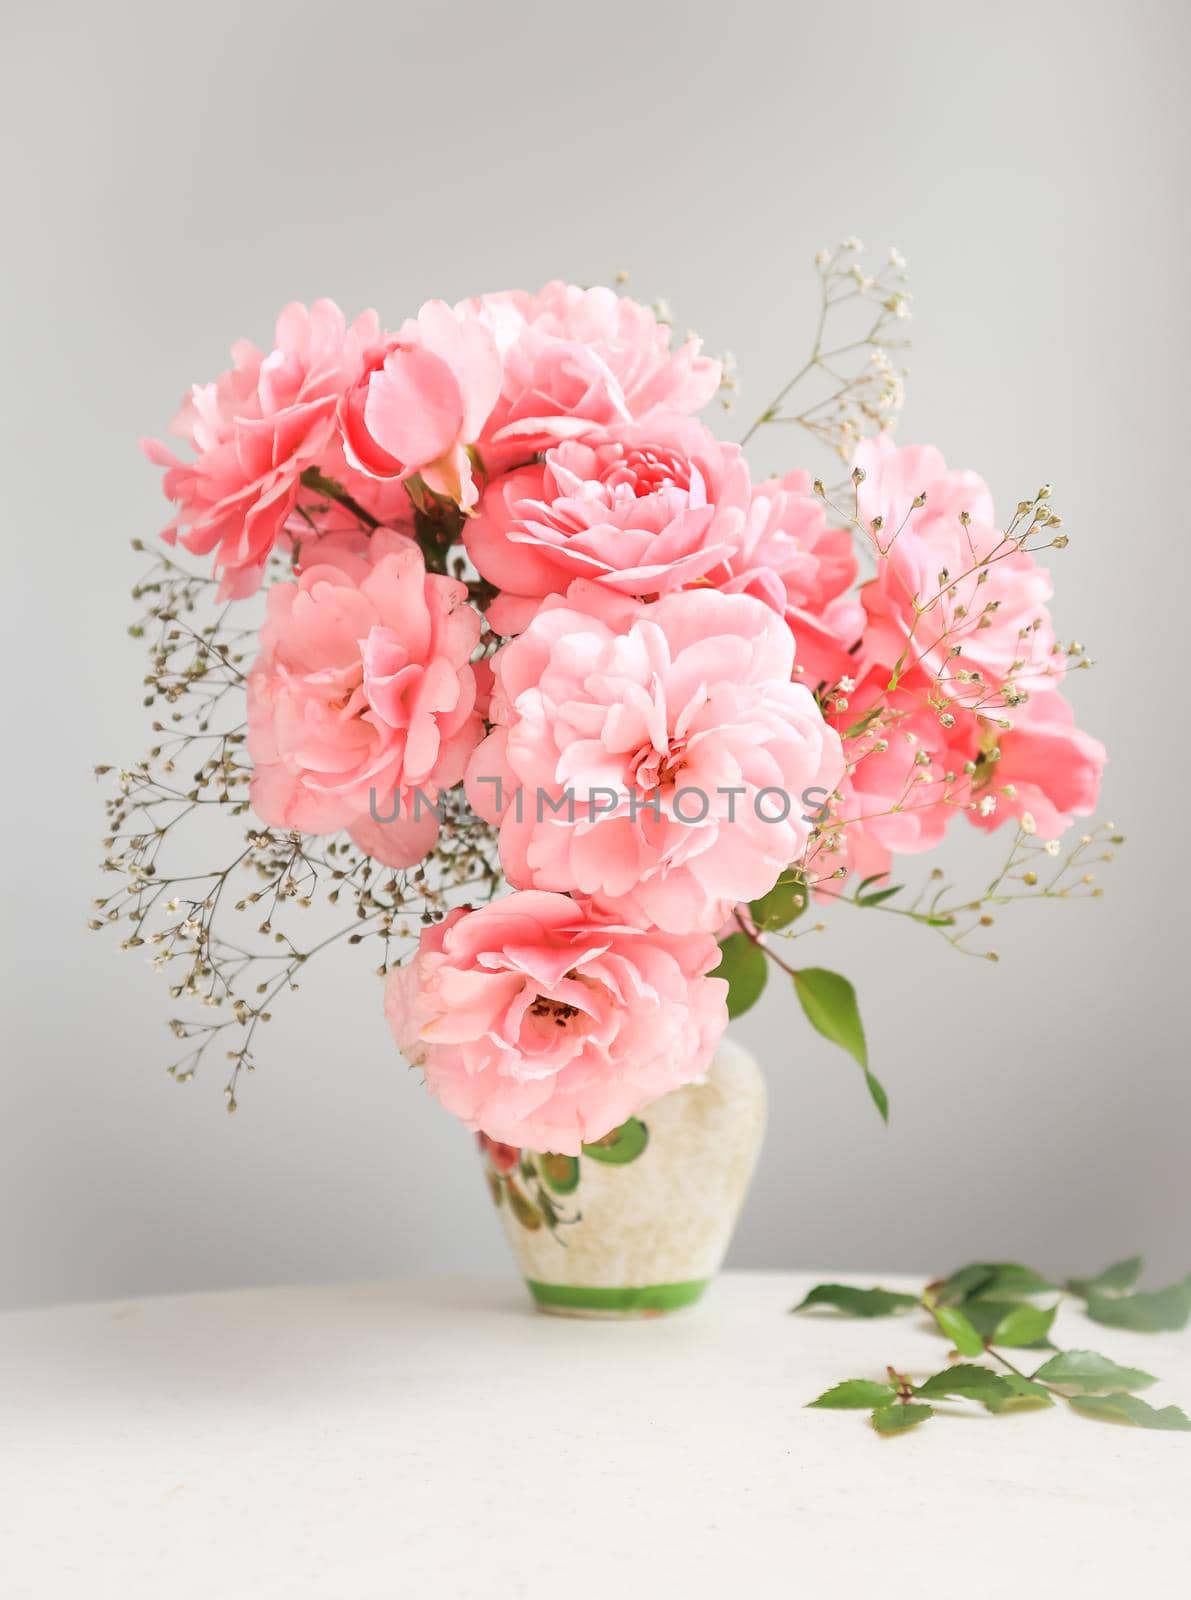 Bouquet of pink roses in a vase on a gray background